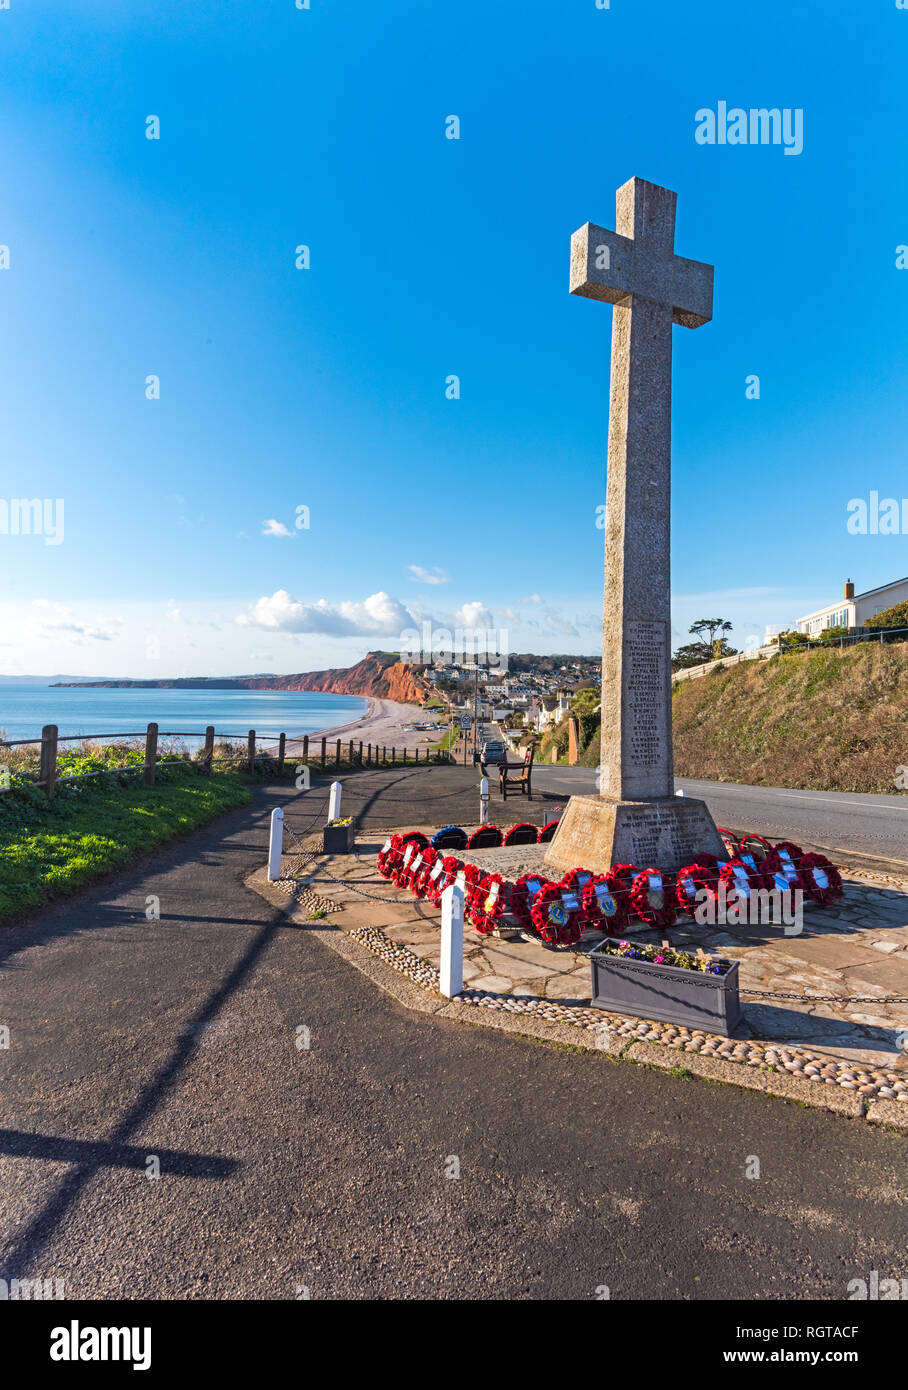 BUDLEIGH SALTERTON, EAST Devon, UK - 17JAN2019: The War Memorial at the top of Salting Hill with the town and view to the west in the background. Stock Photo